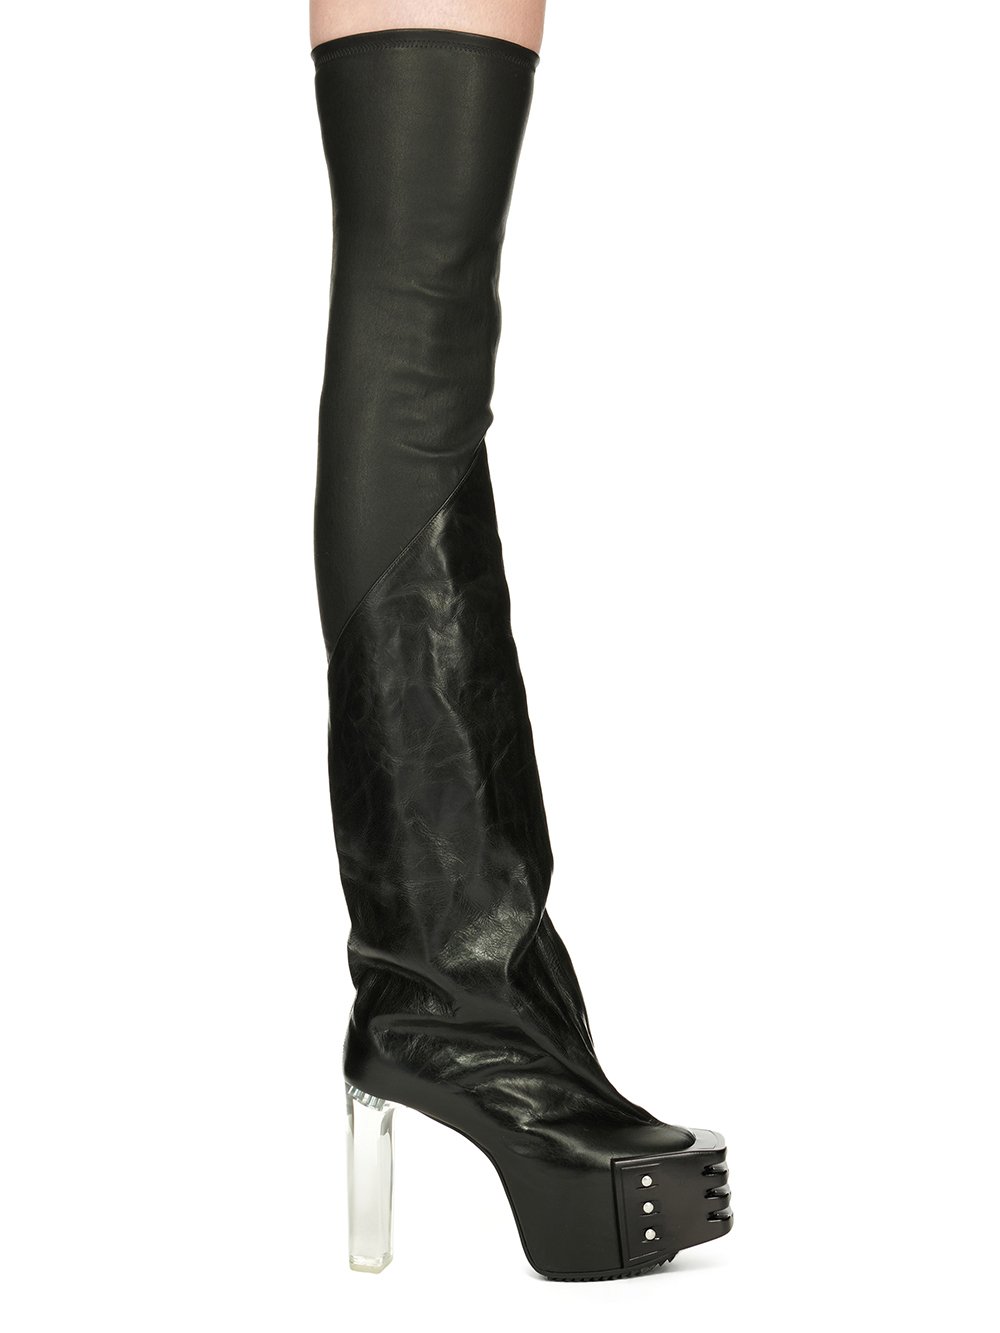 RICK OWENS FW23 LUXOR FLARED PLATFORMS 65 IN BLACK STRETCH LAMB LEATHER AND GLASLUX, GLOSSY CALF LEATHER